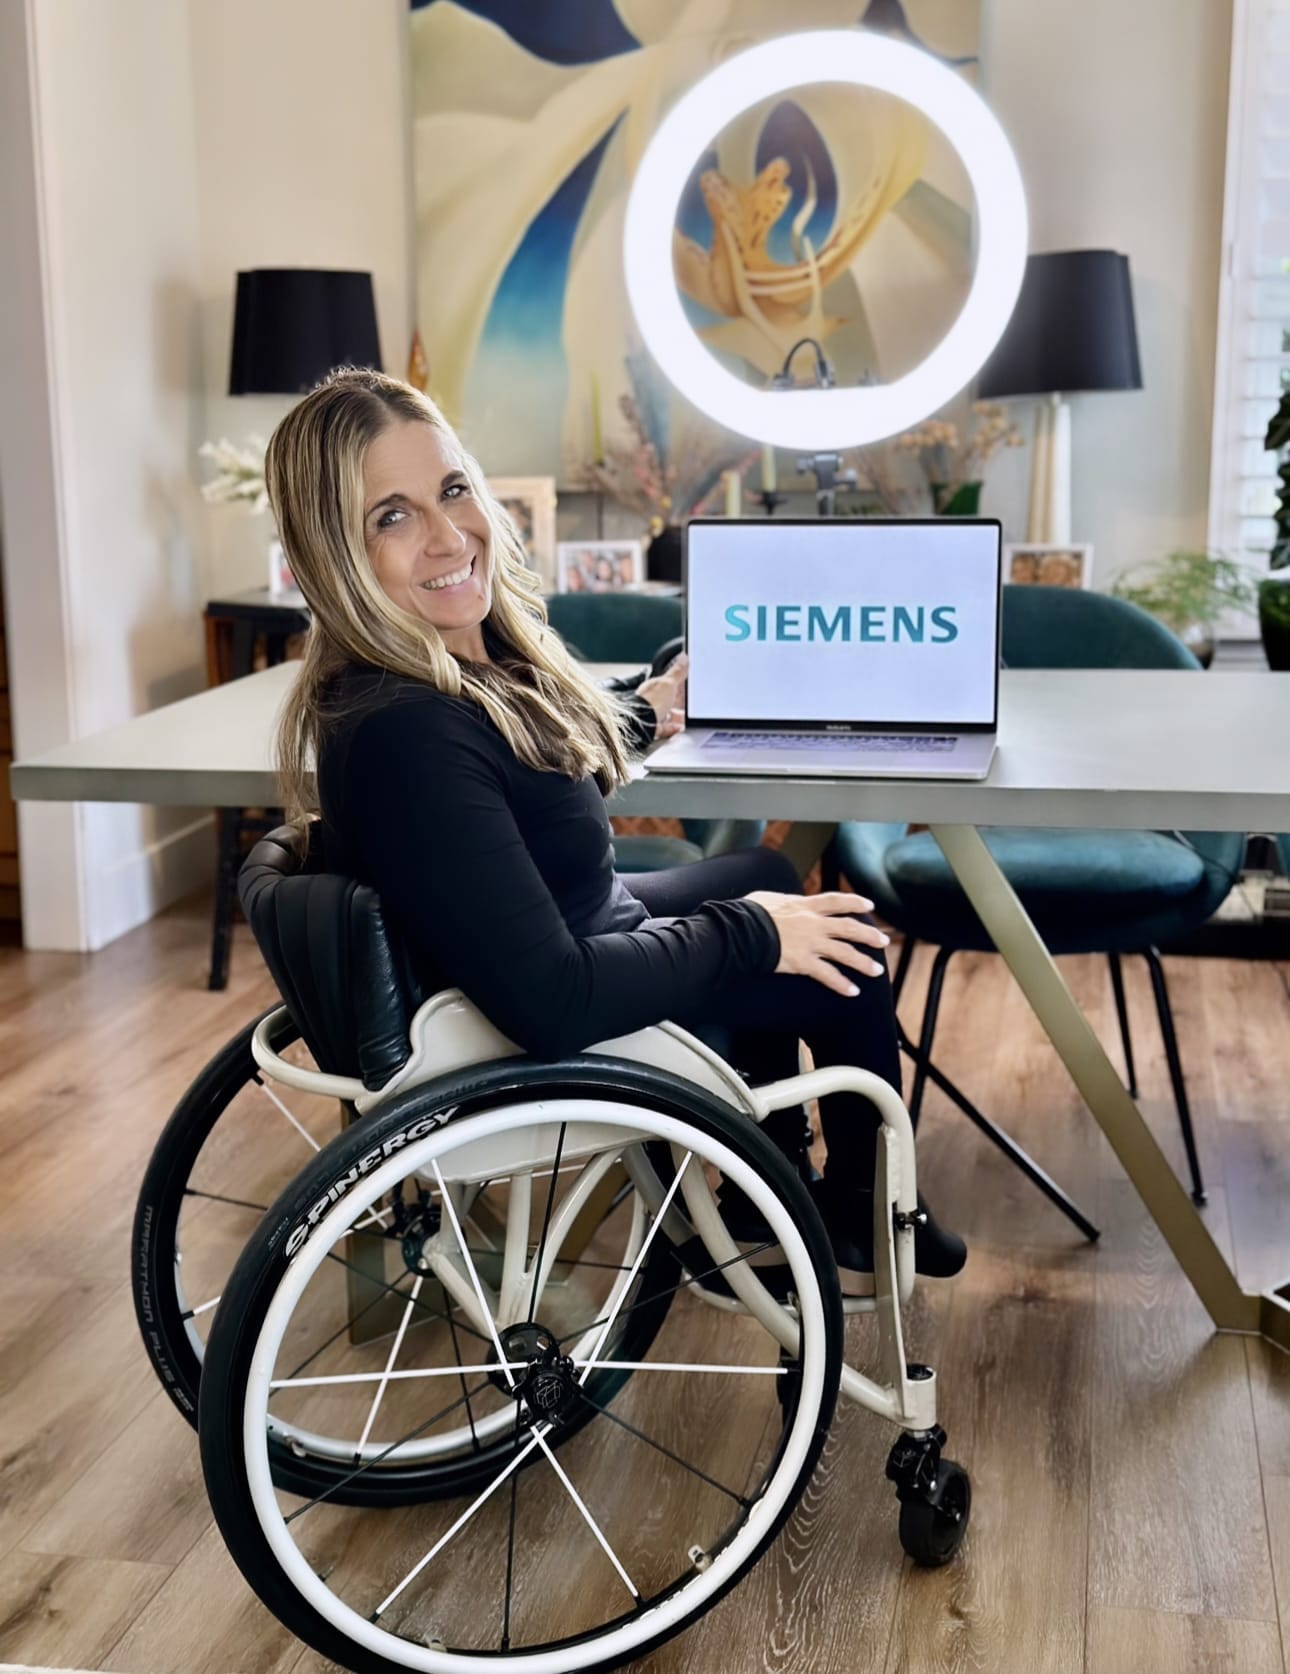 ID: Alycia wearing all black sitting in her wheelchair at her home studio in front of a table with a laptop showing the Siemens logo.